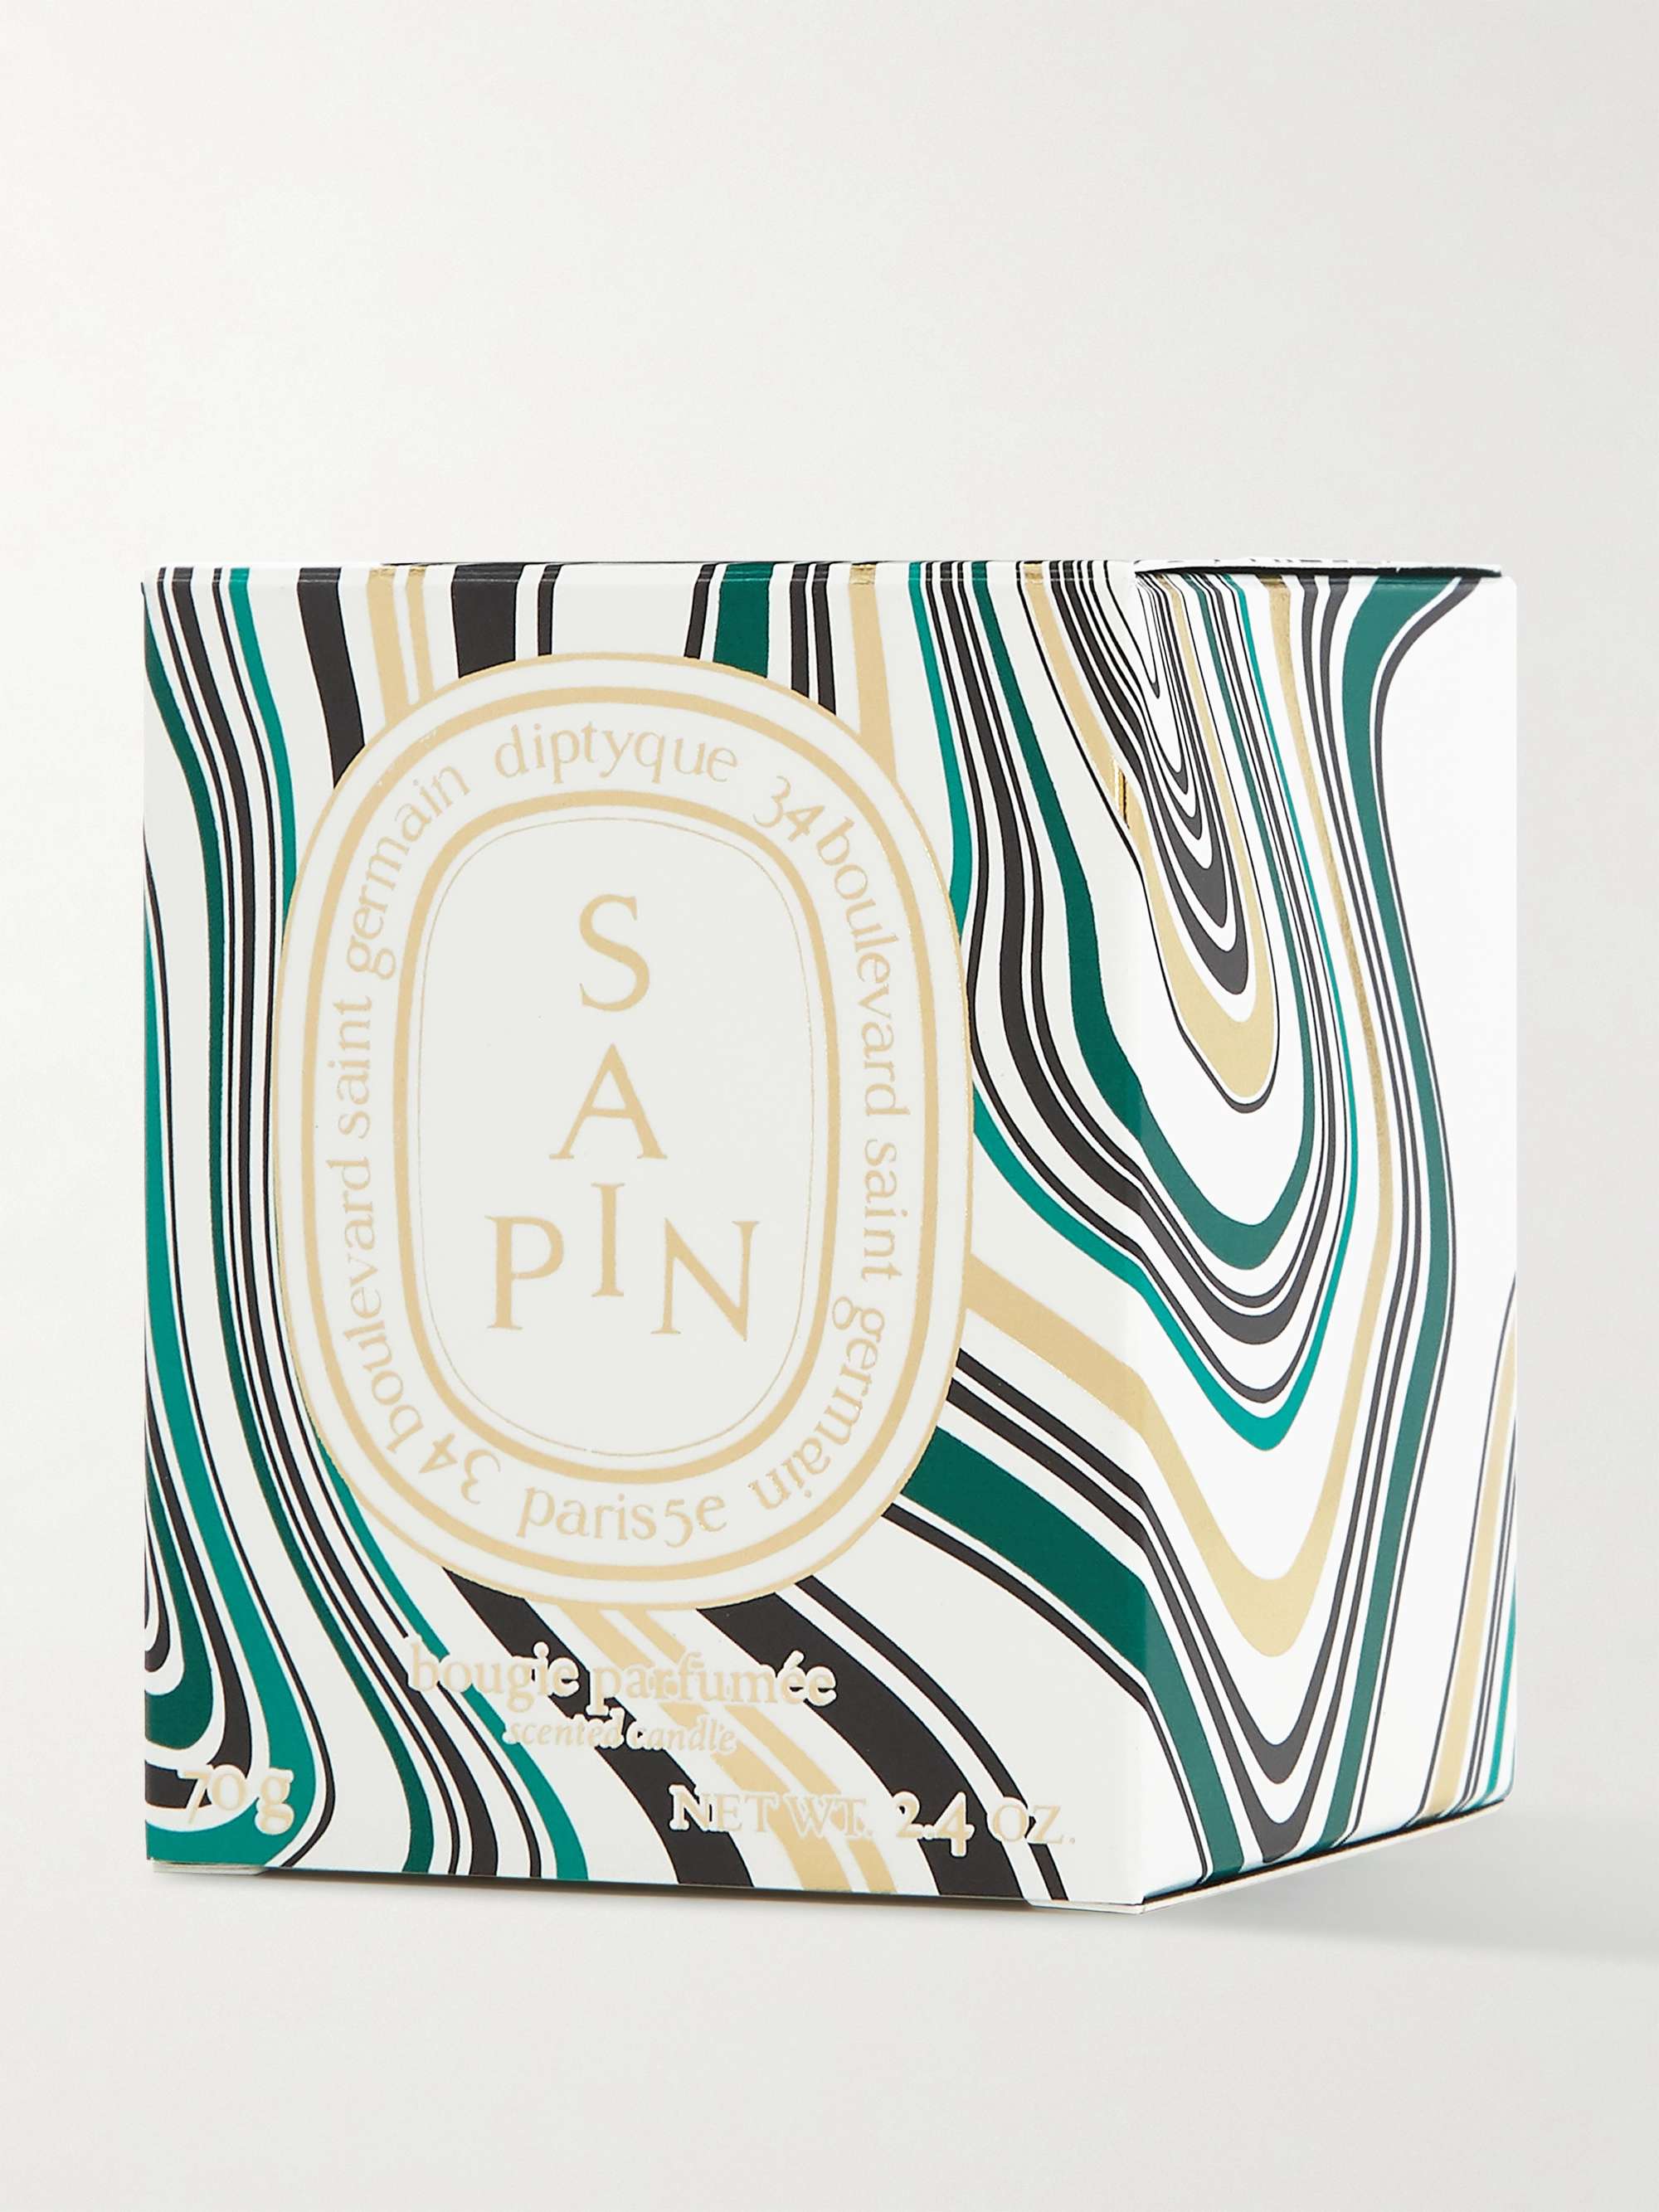 DIPTYQUE Sapin Scented Candle, 70g